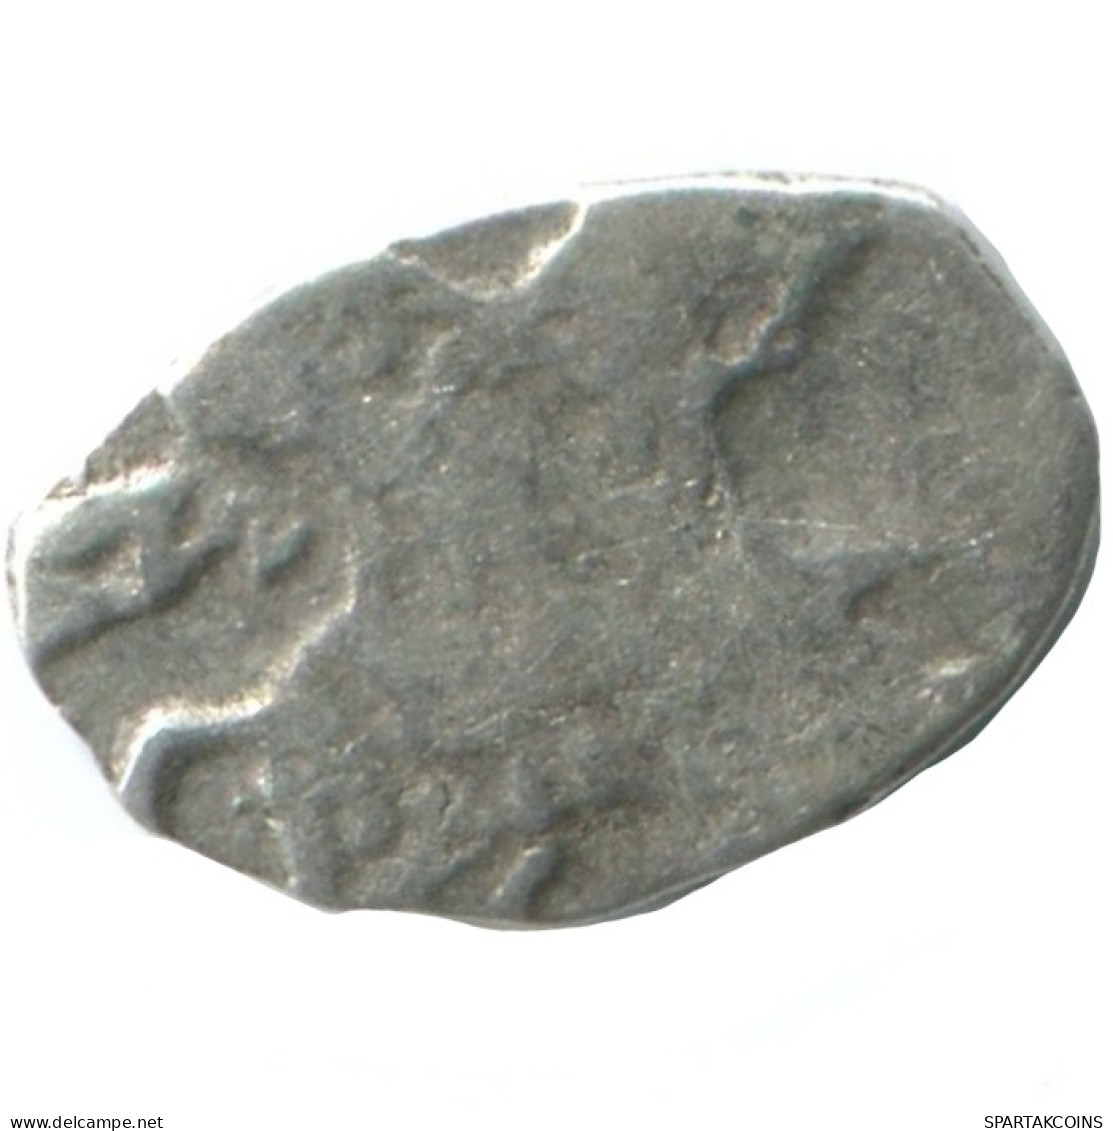 RUSSIE RUSSIA 1701 KOPECK PETER I OLD Mint MOSCOW ARGENT 0.3g/8mm #AB496.10.F.A - Russia